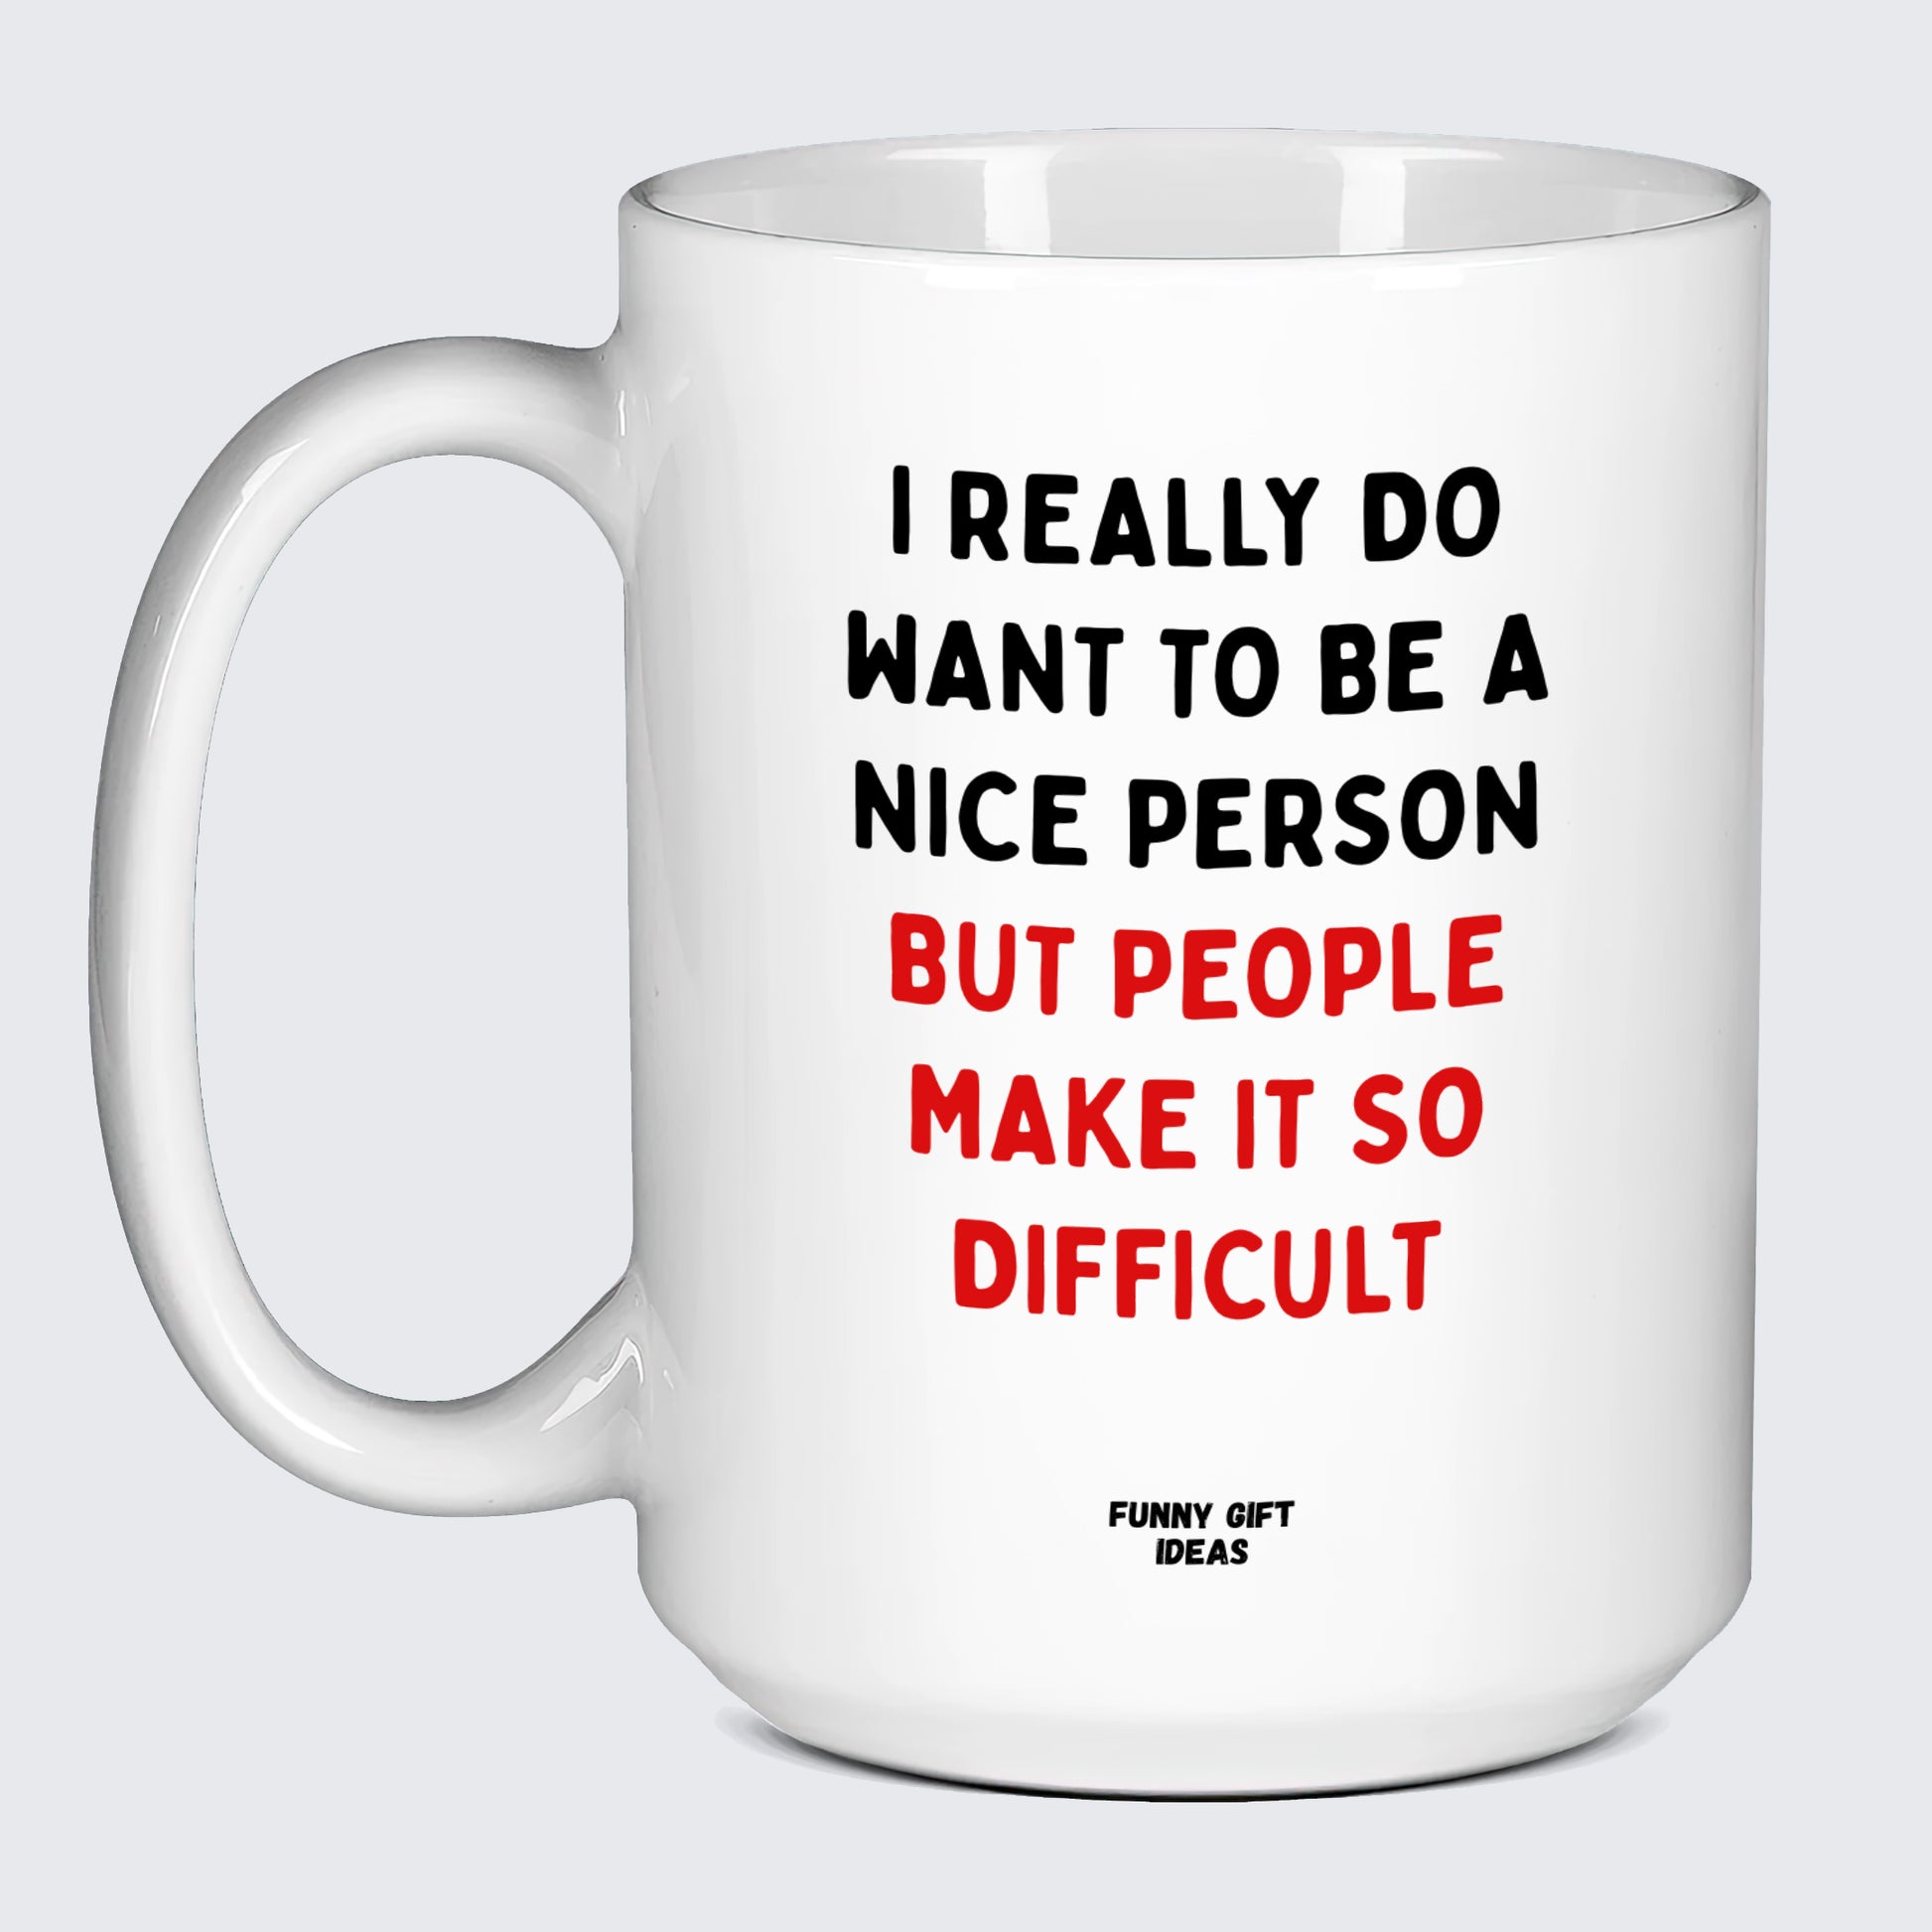 Cool Mugs - I Really Do Want to Be a Nice Person (but People Make It So Difficult) - Coffee Mug